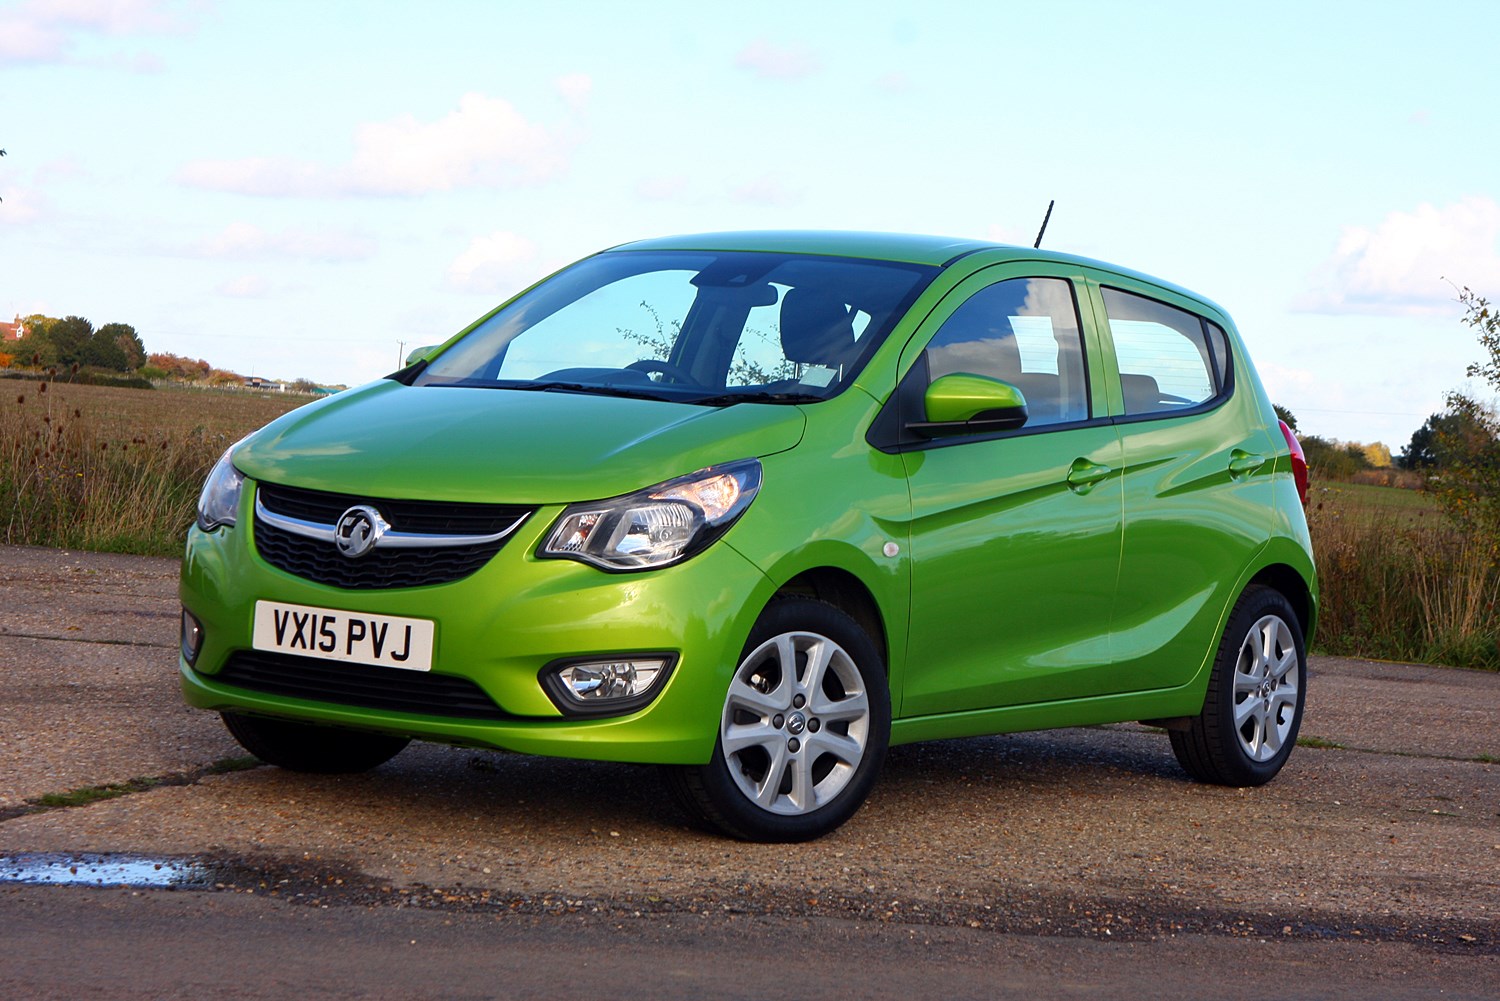 Used Vauxhall Viva Hatchback (2015  2019) Review  Parkers